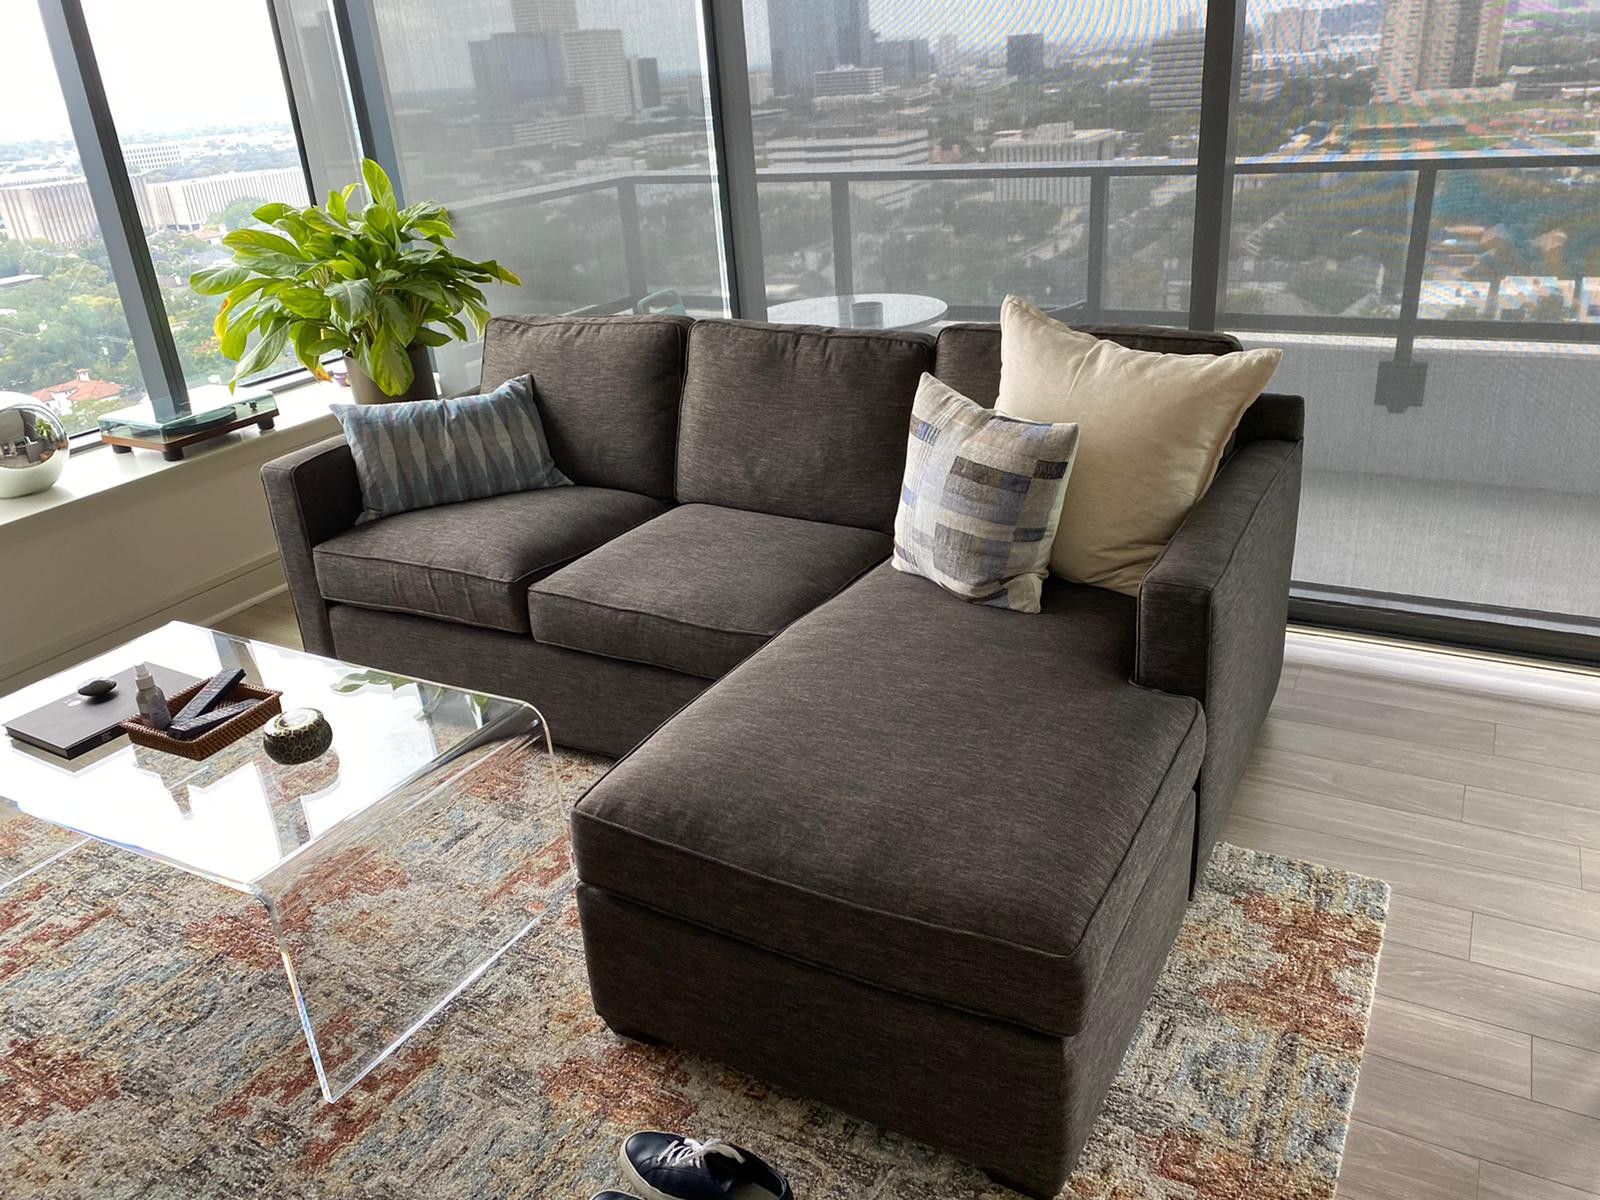 Almost brand new sectional sofa